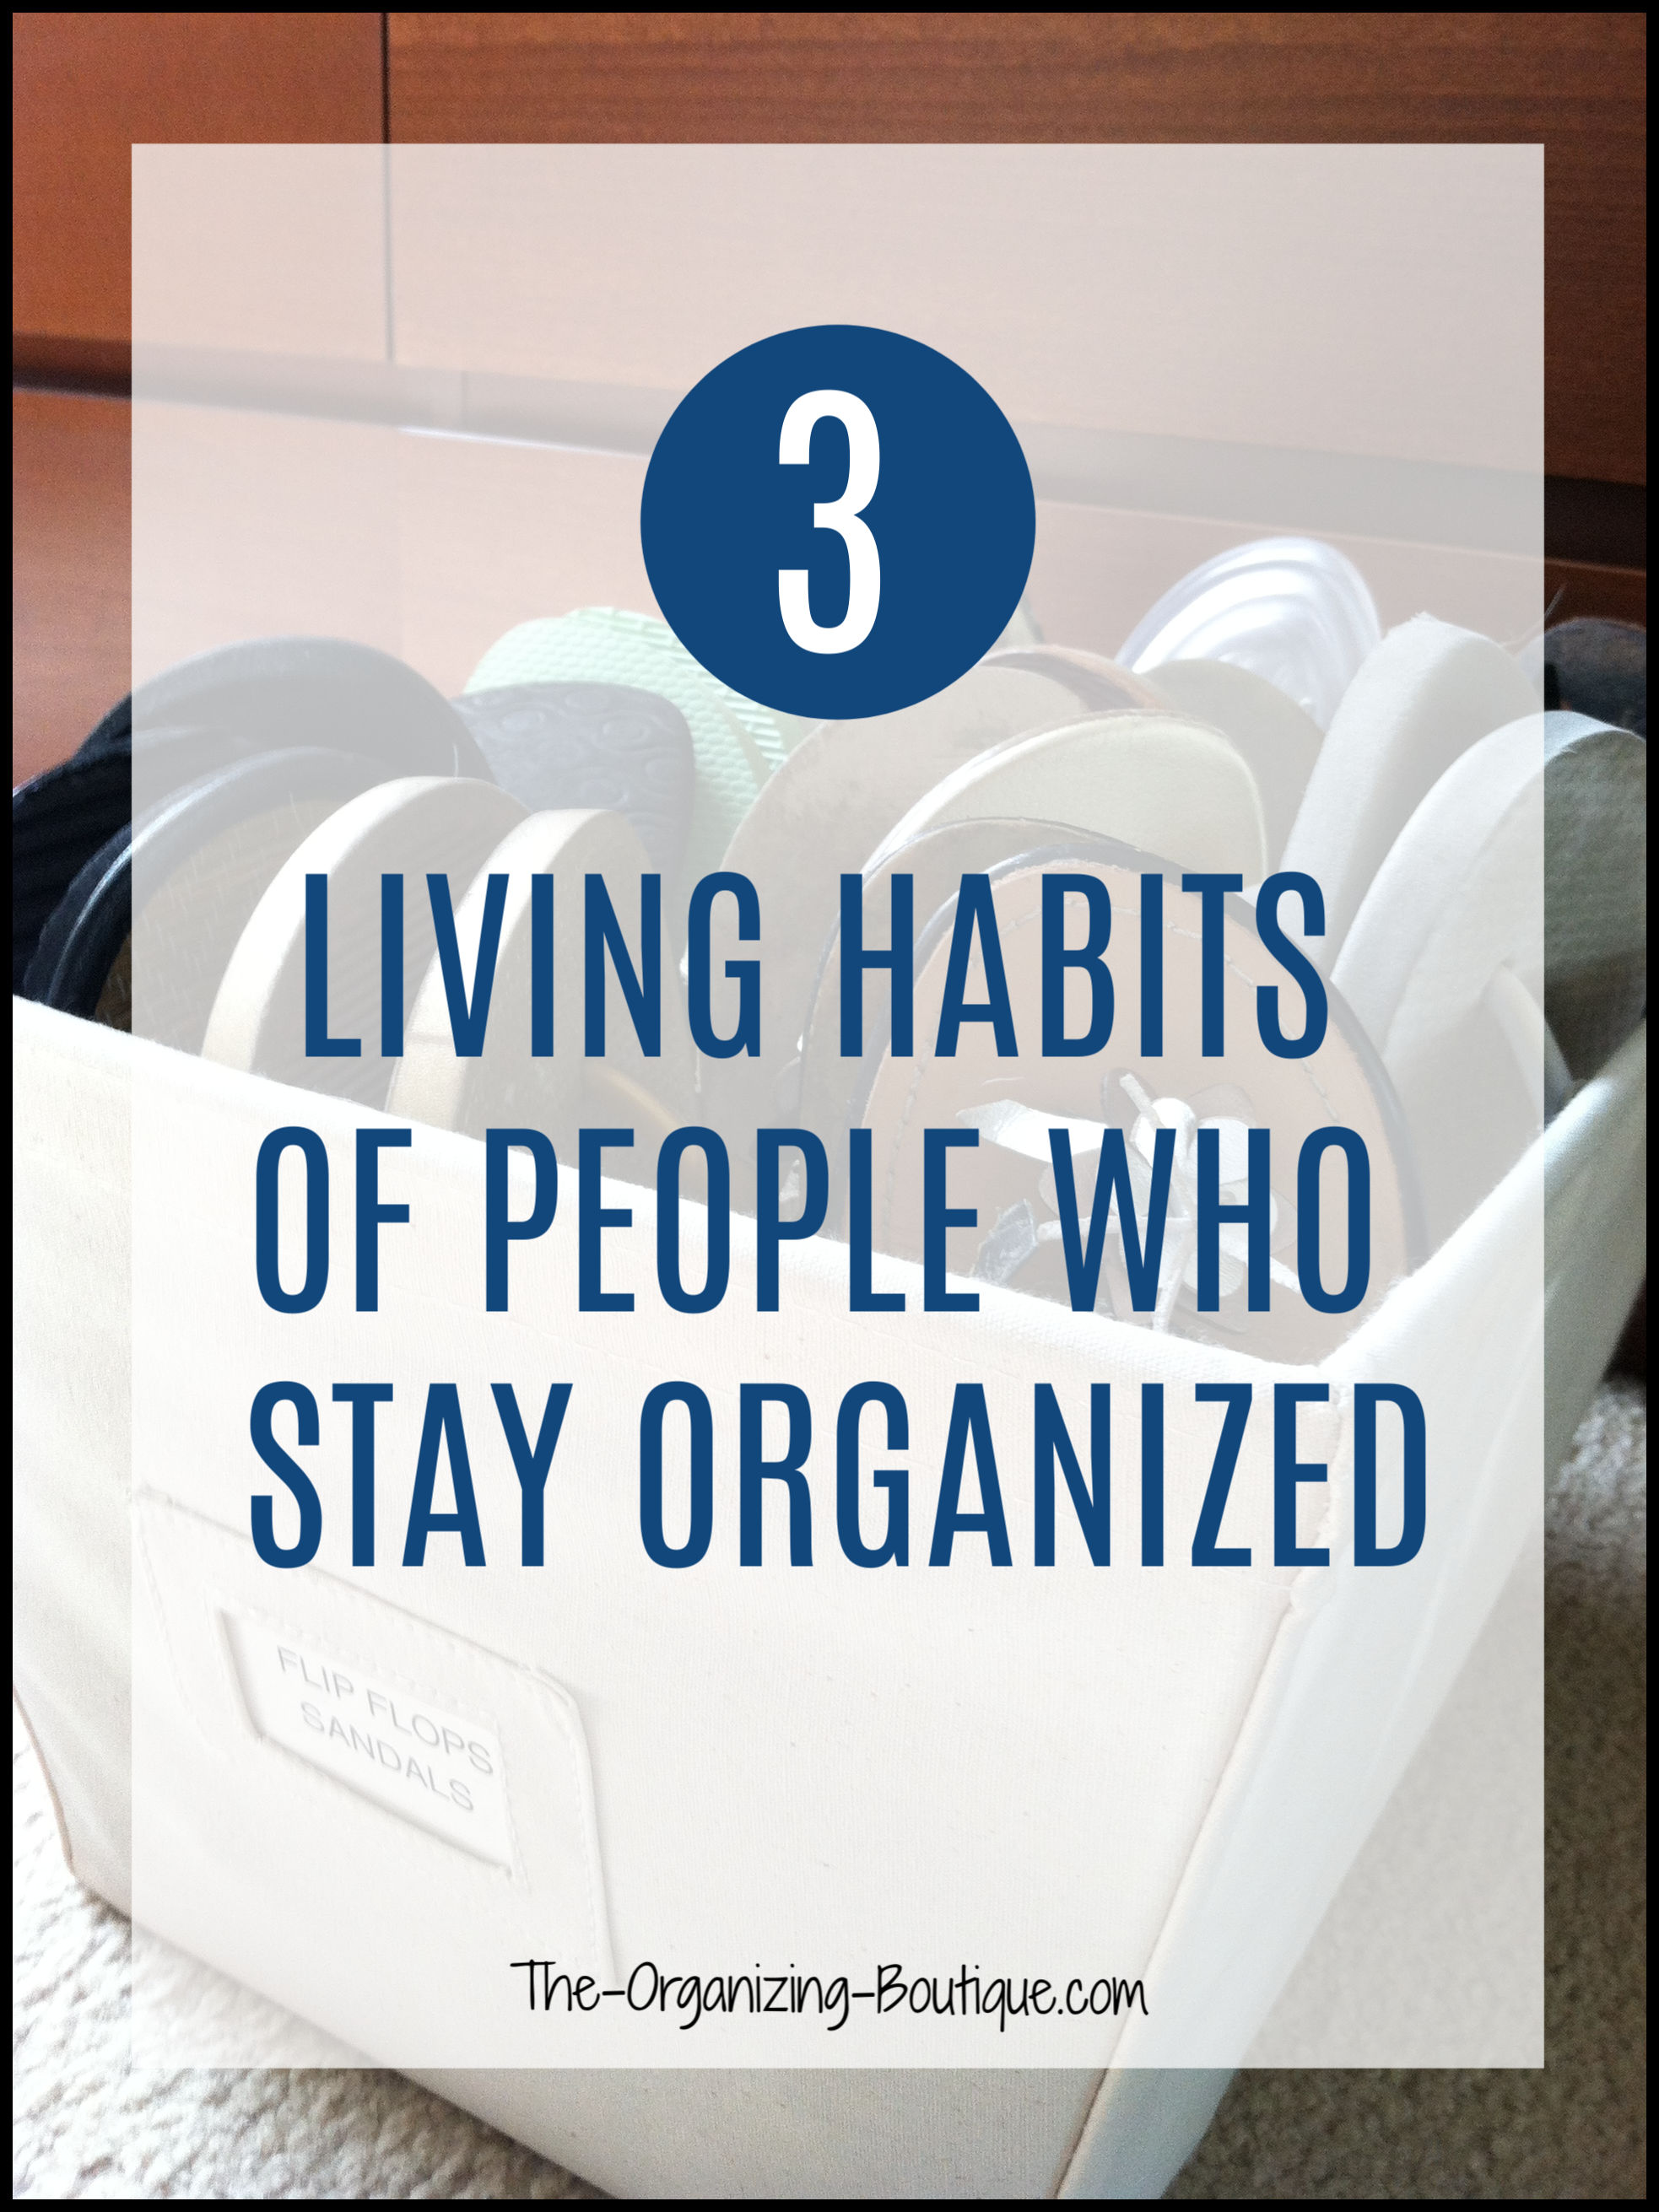 Living consciously involves organizing habits. Here are tips for creating an organized home one day at a time!